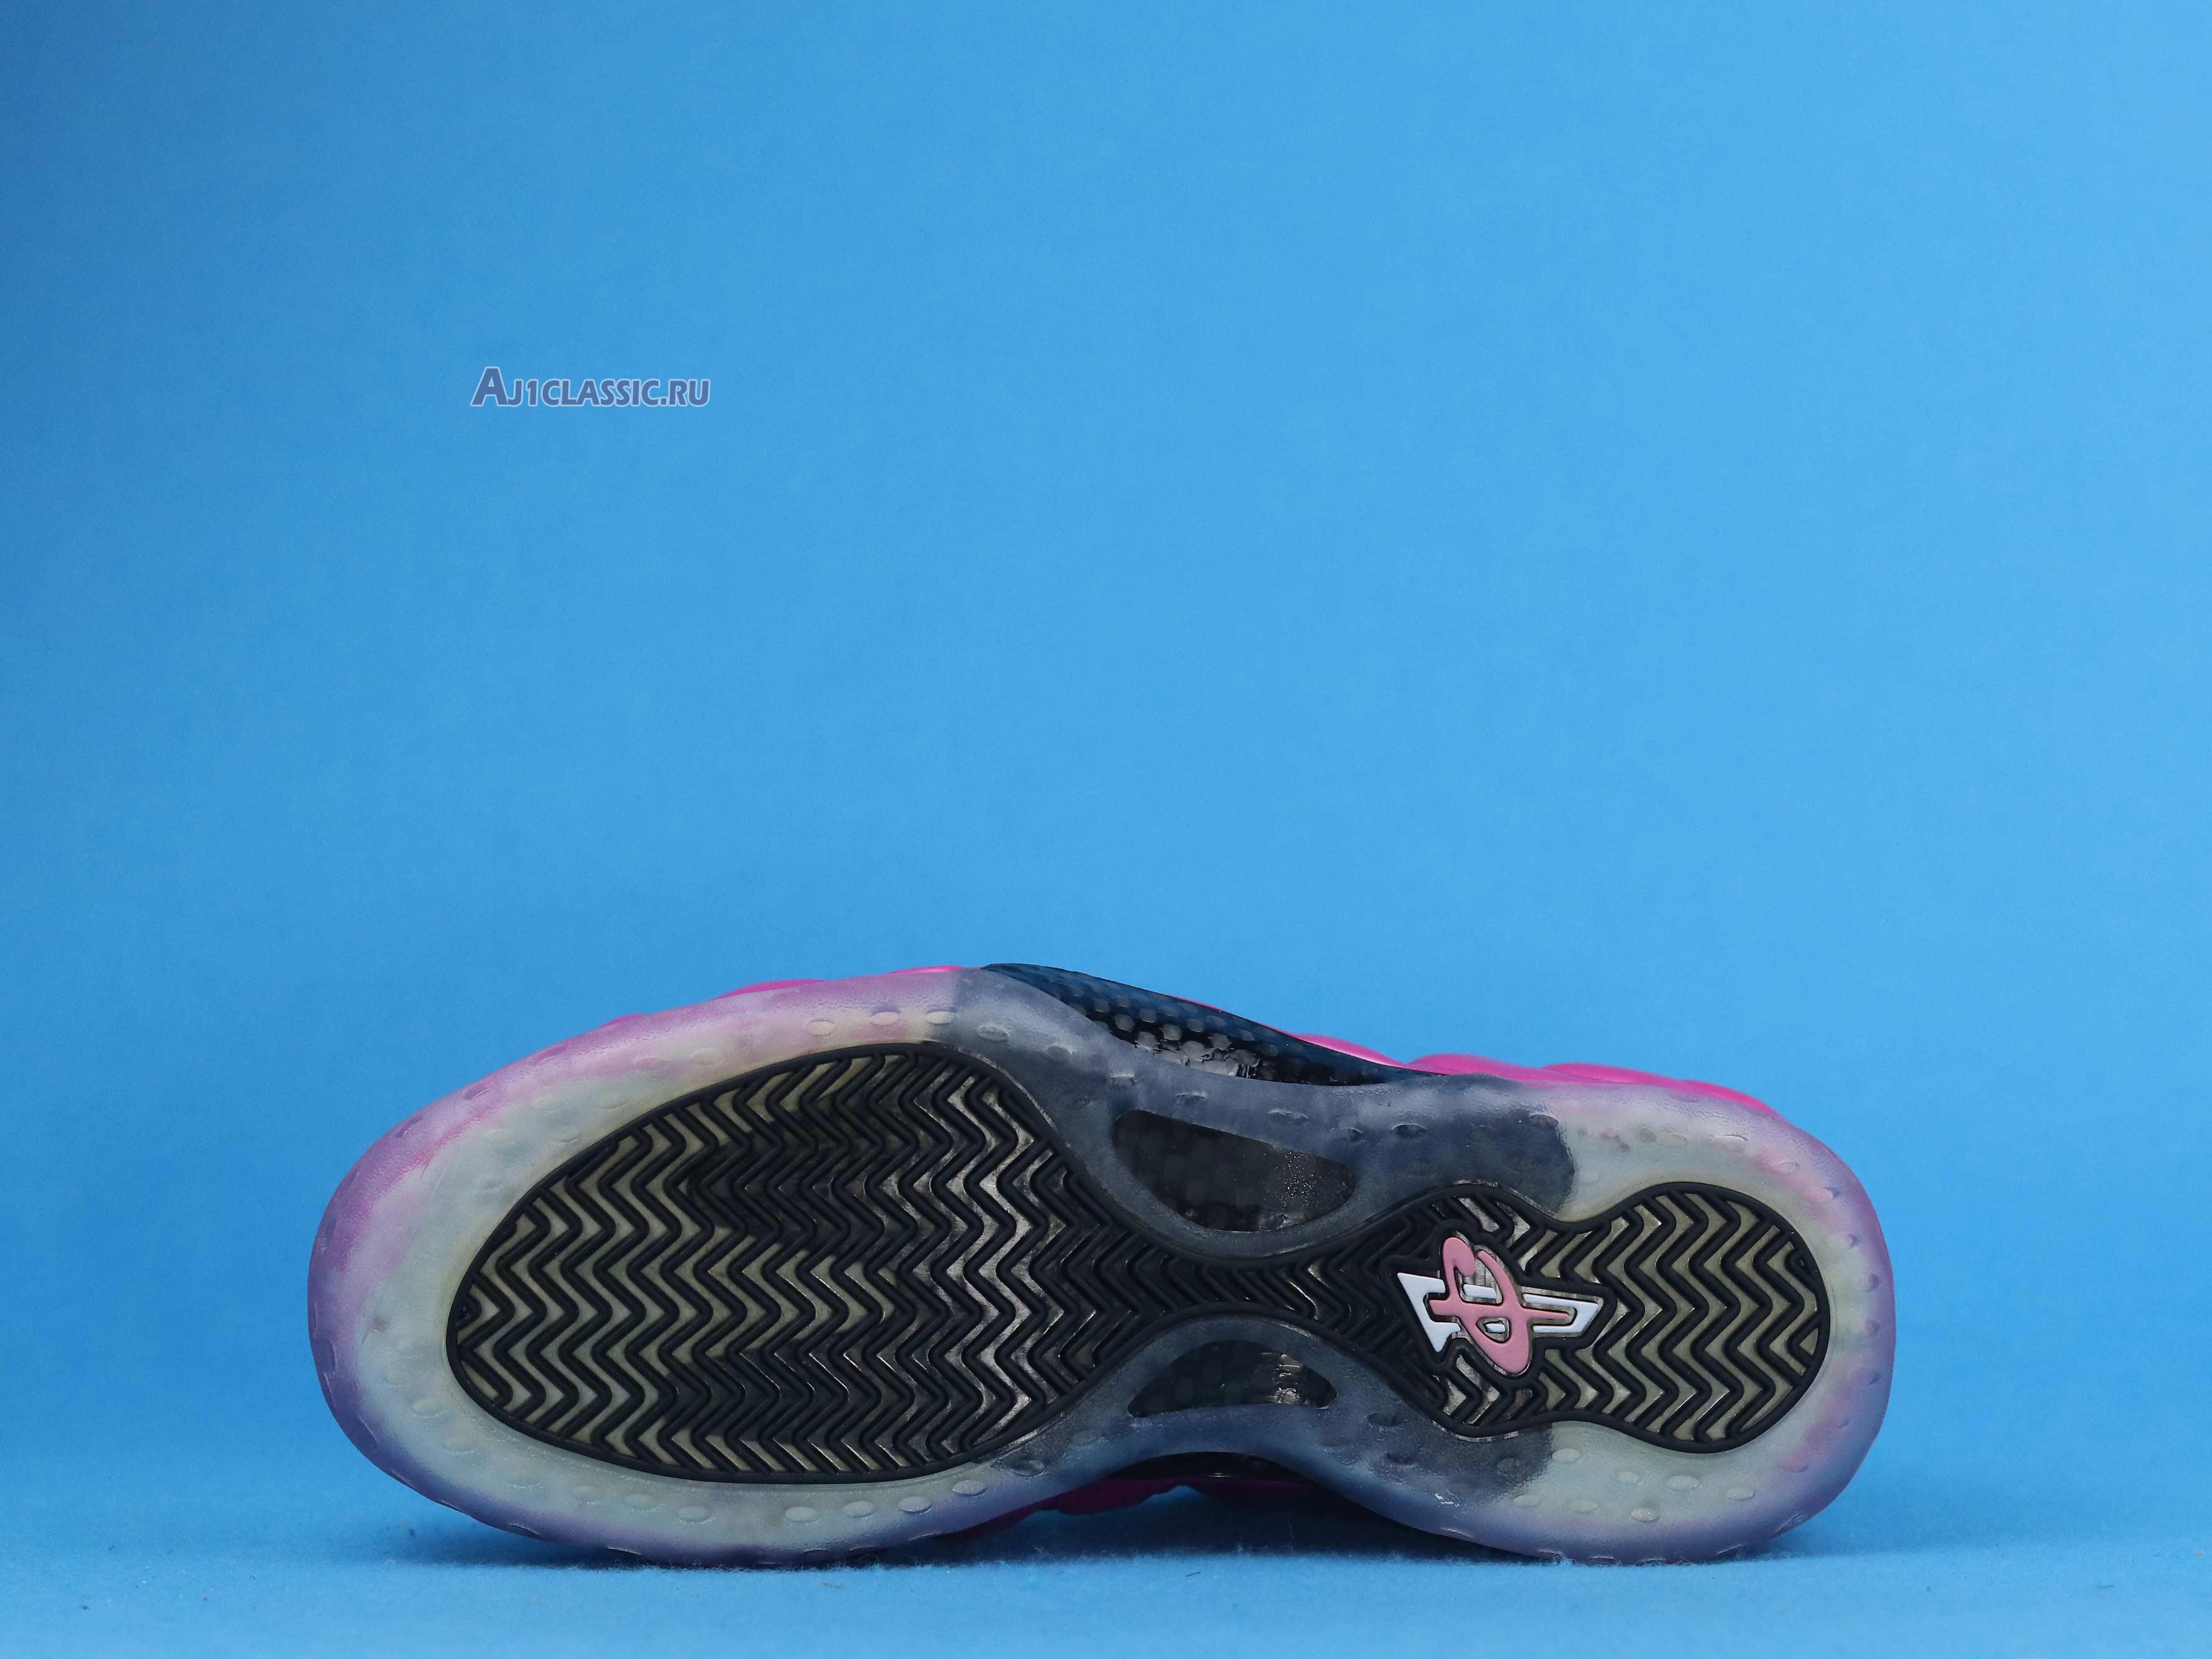 Nike Air Foamposite One "Pearlized Pink" 314996-600